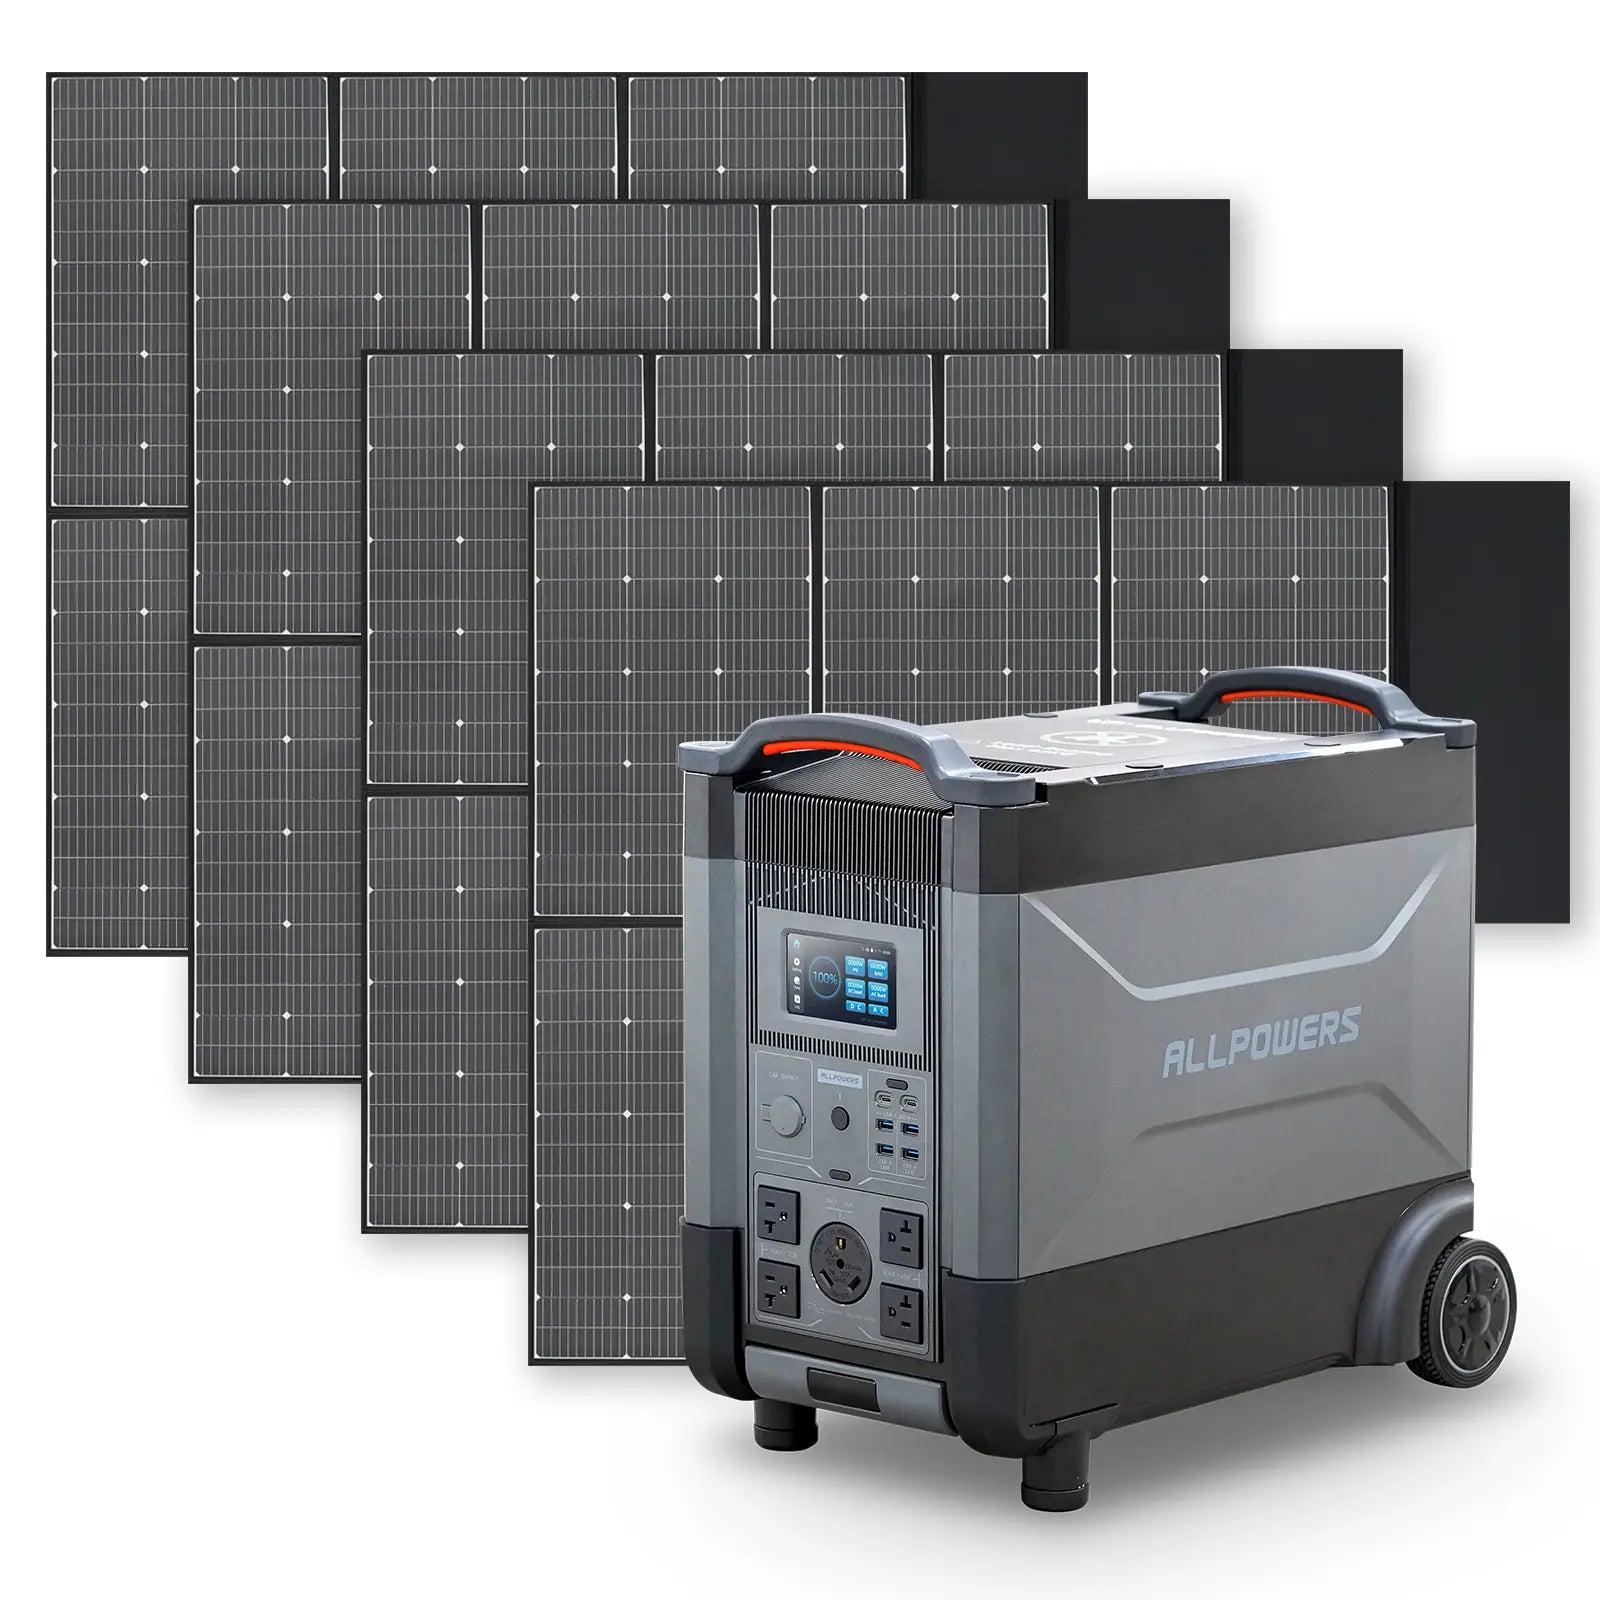 ALLPOWERS R4000 Portable Power Station 4000W 3600Wh (R4000 + 4 x SP039 600W Solar Panel)